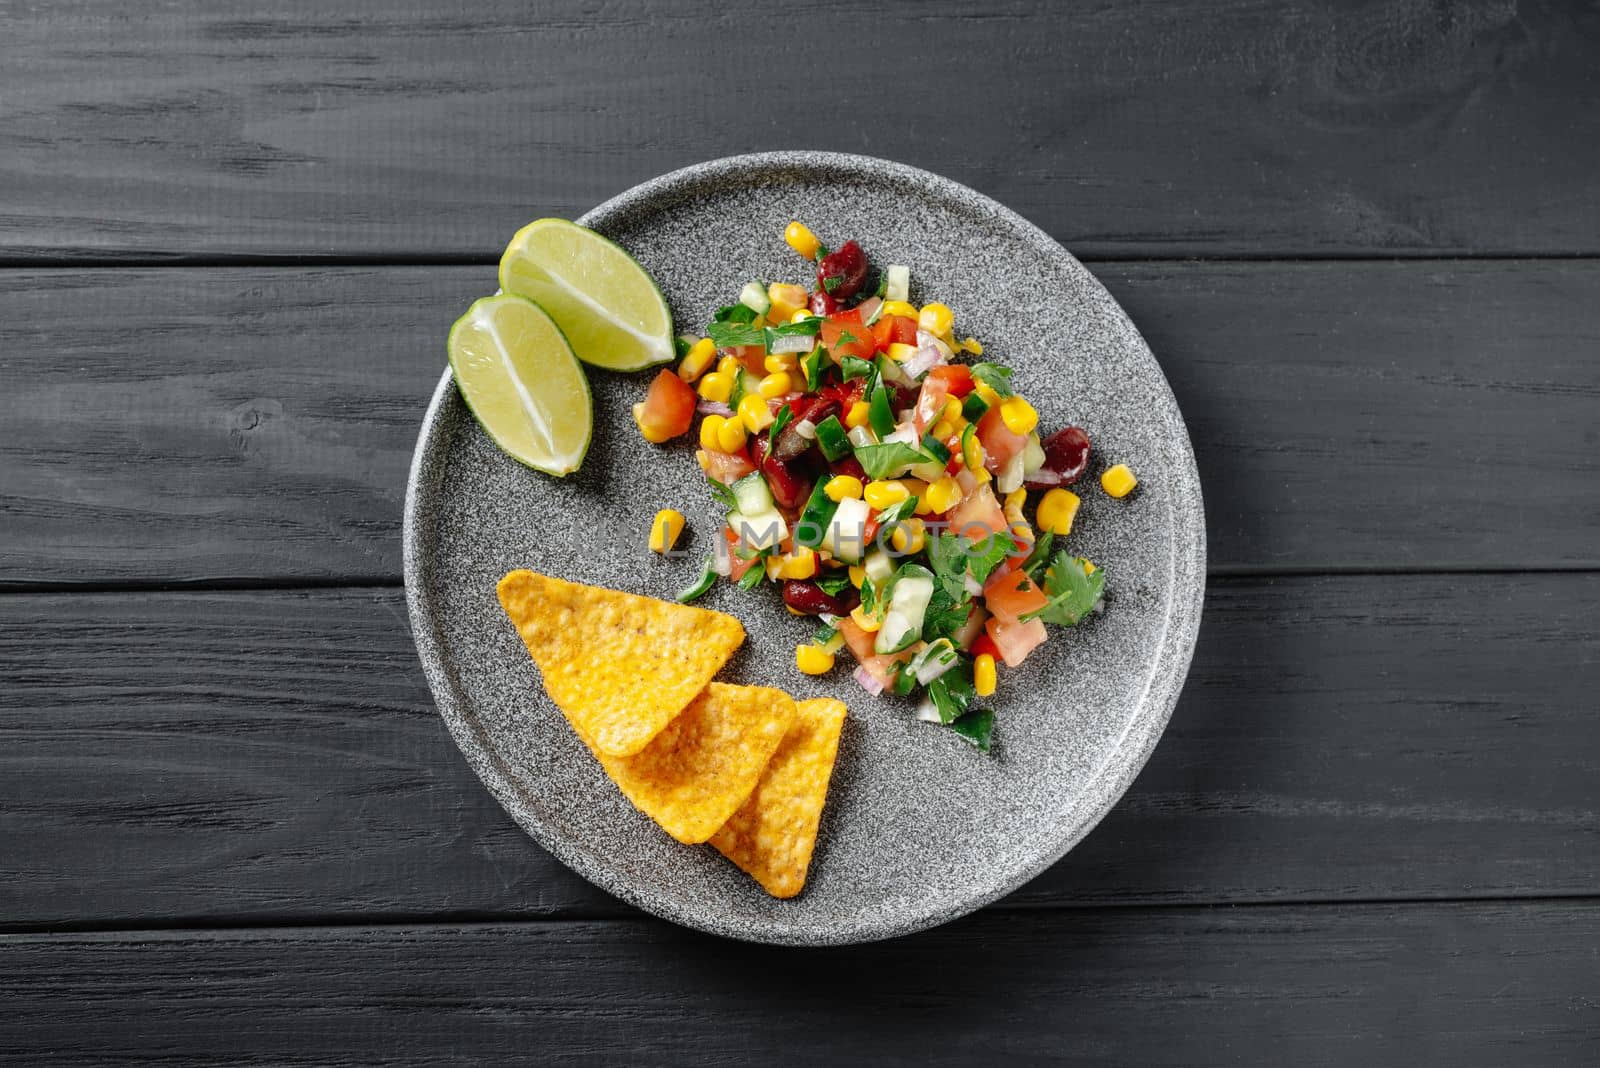 Texas caviar on a black wooden background. Top view. Texas dish with chips and nachos on a gray plate. Reducetarian, flexitarian, pescatarian eating